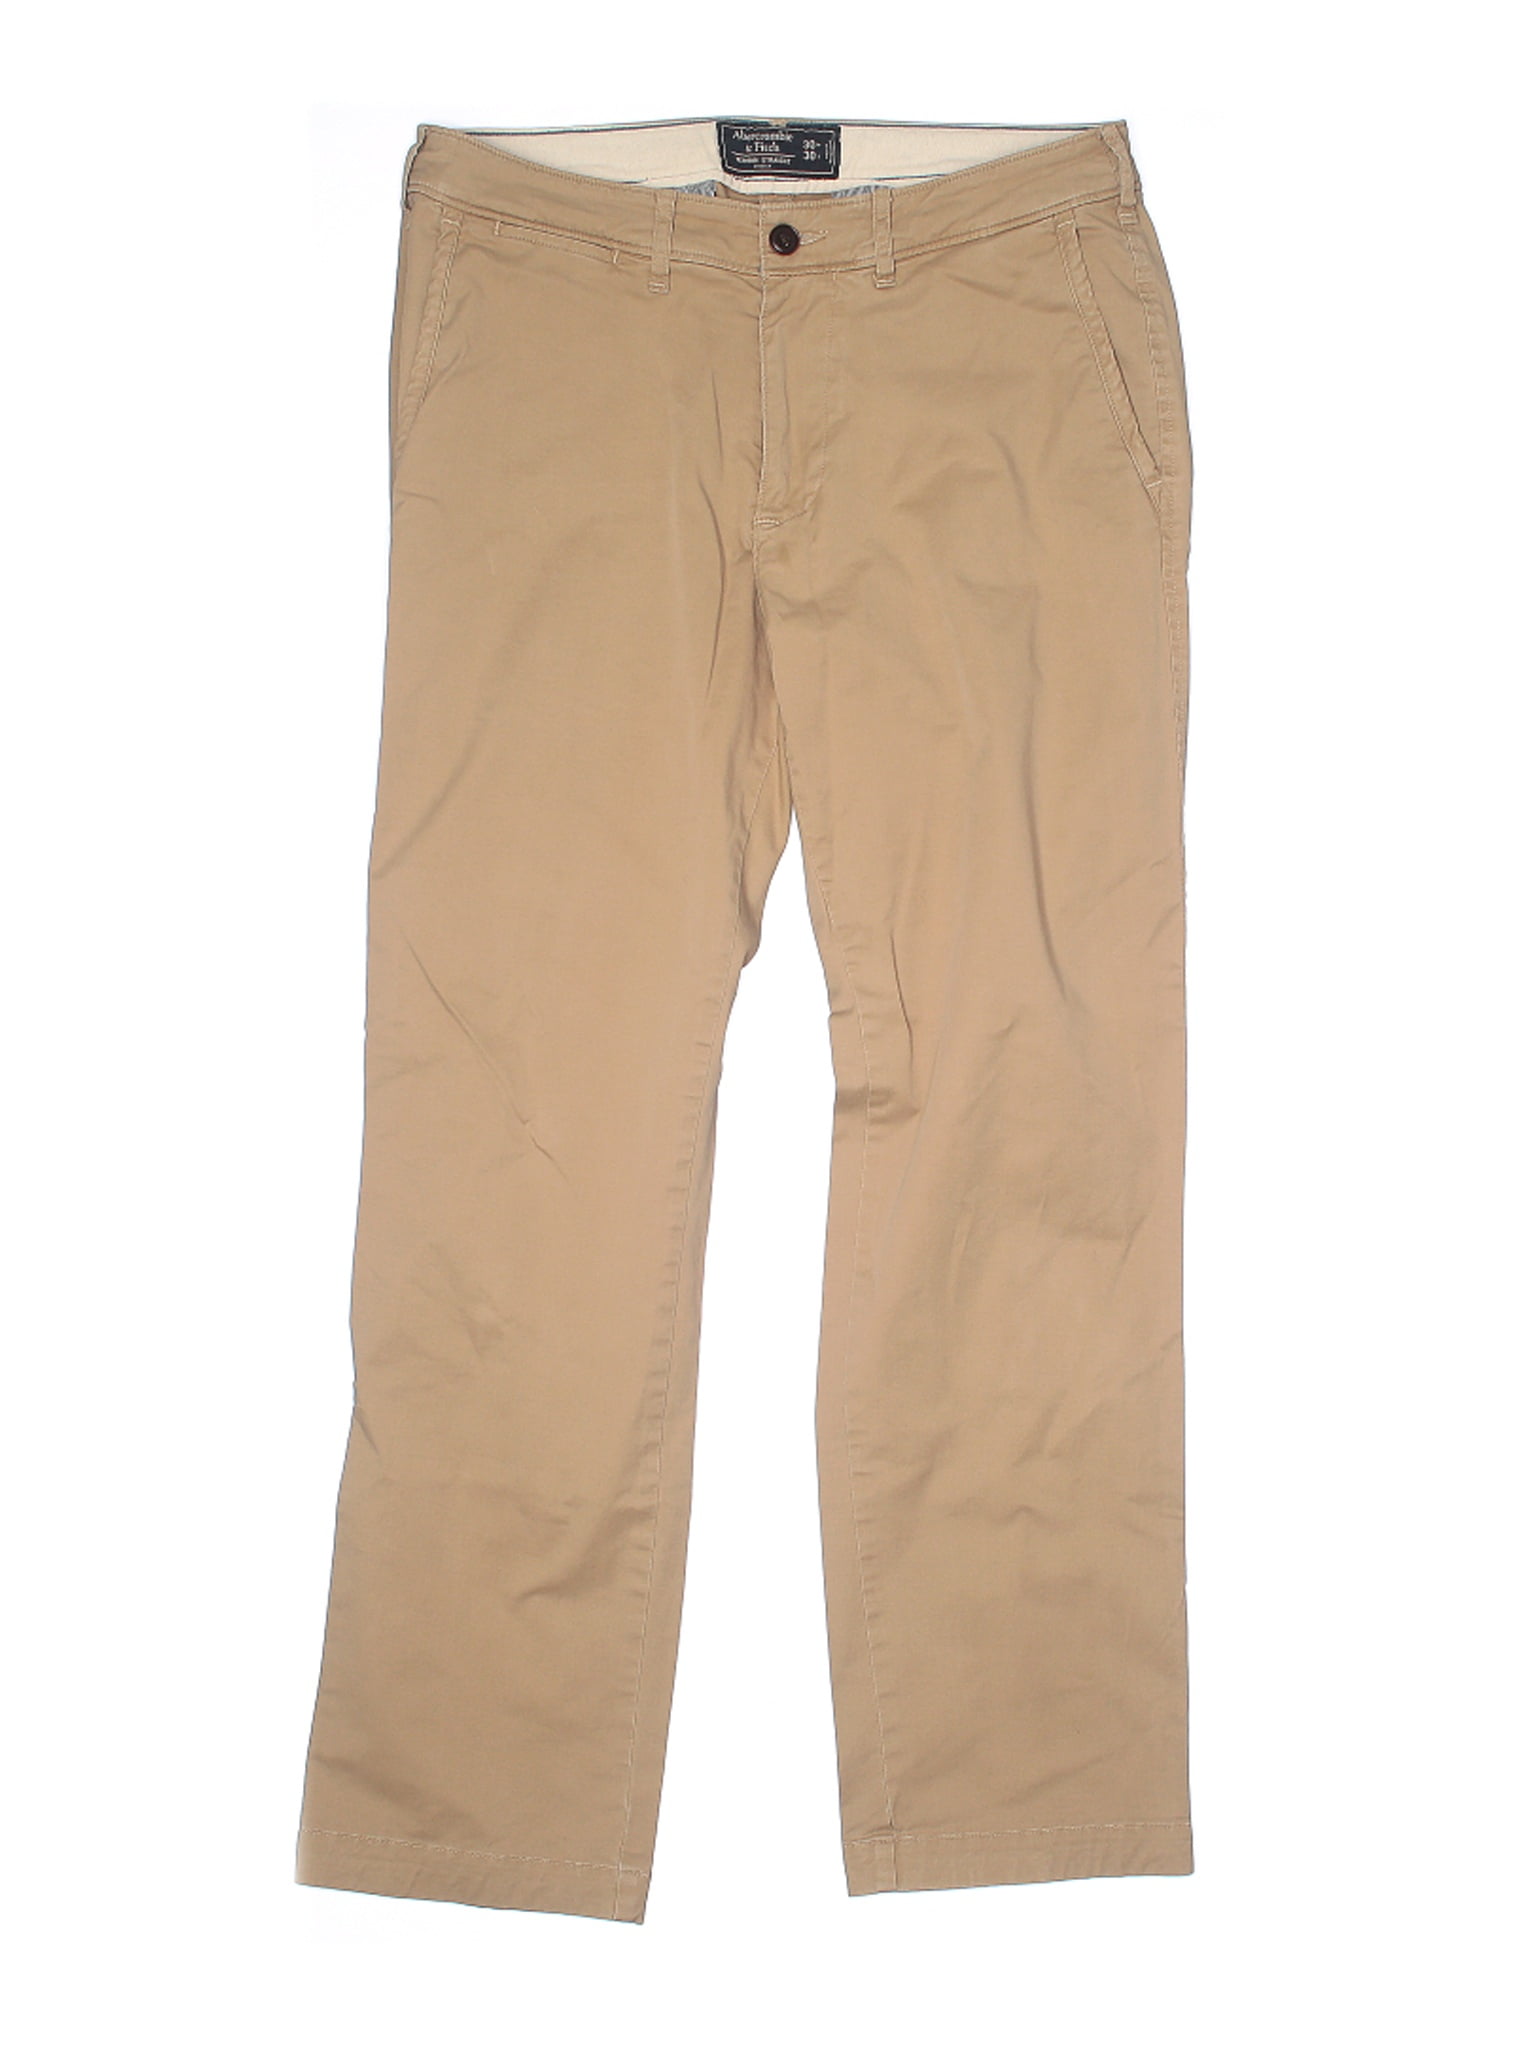 abercrombie and fitch khakis